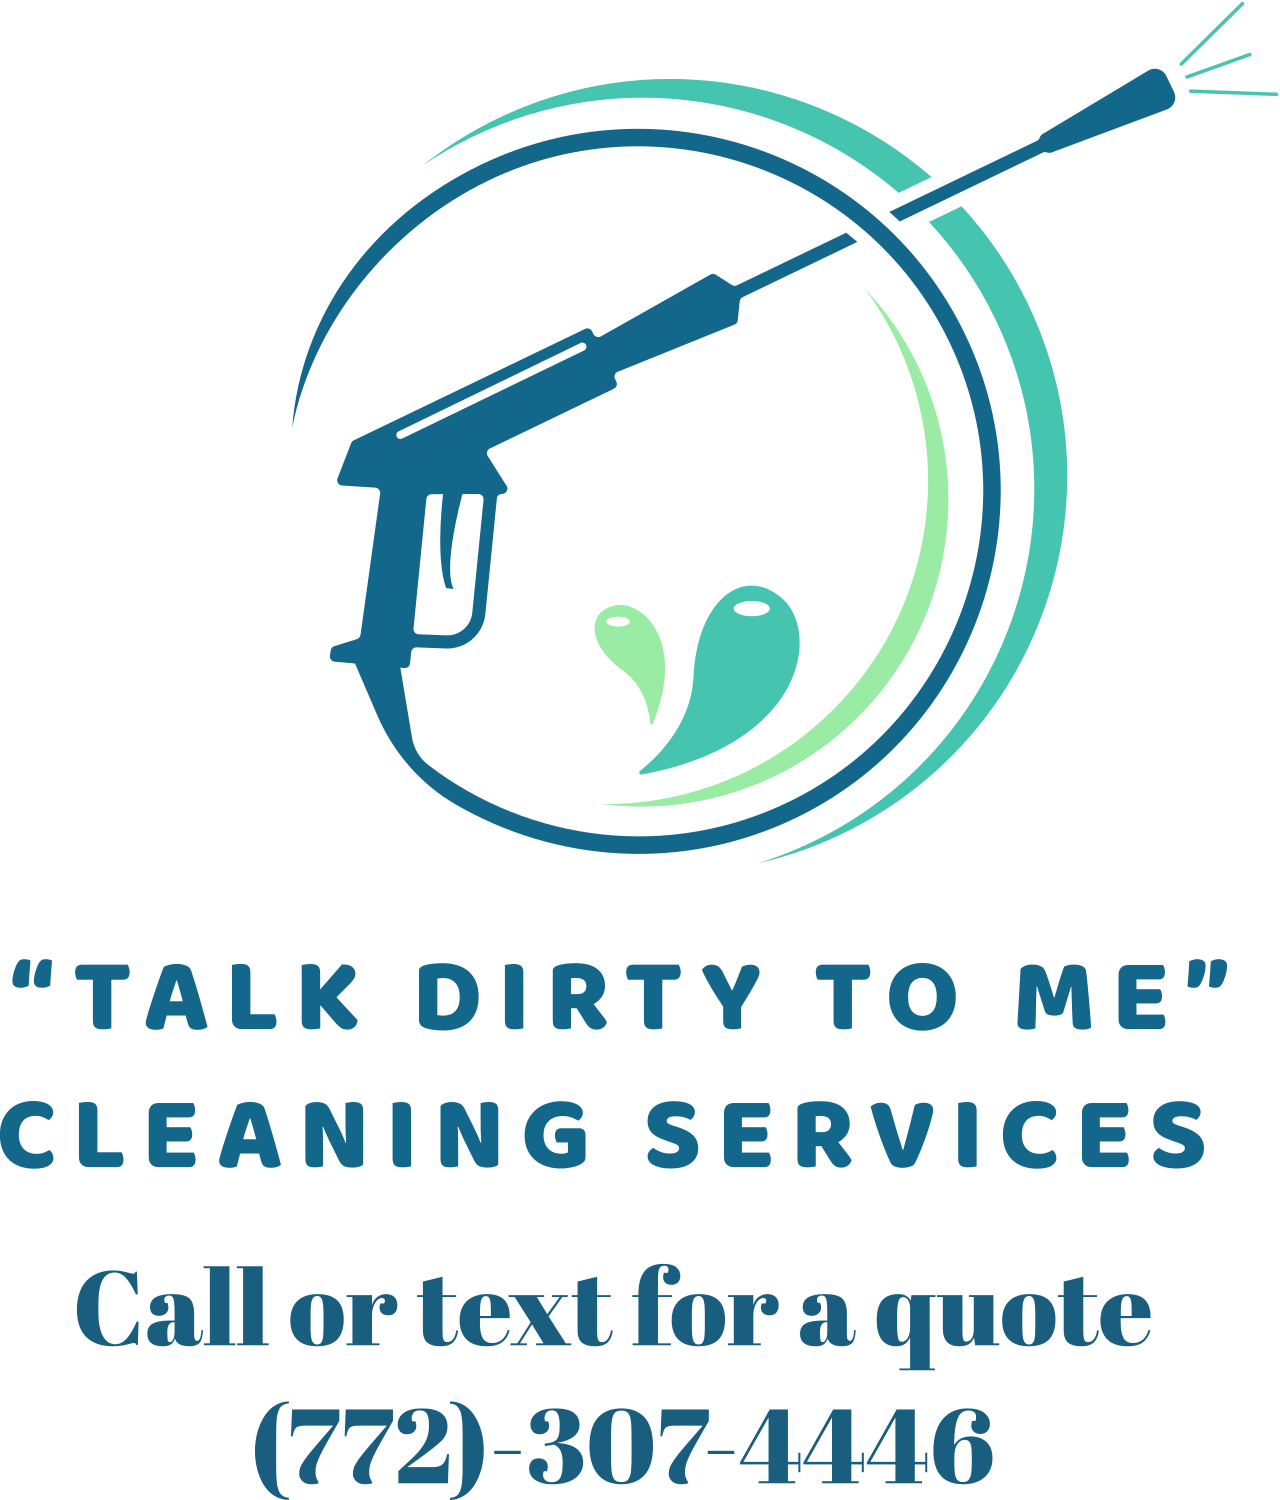 “TALK DIRTY TO ME”
CLEANING SERVICES 's logo